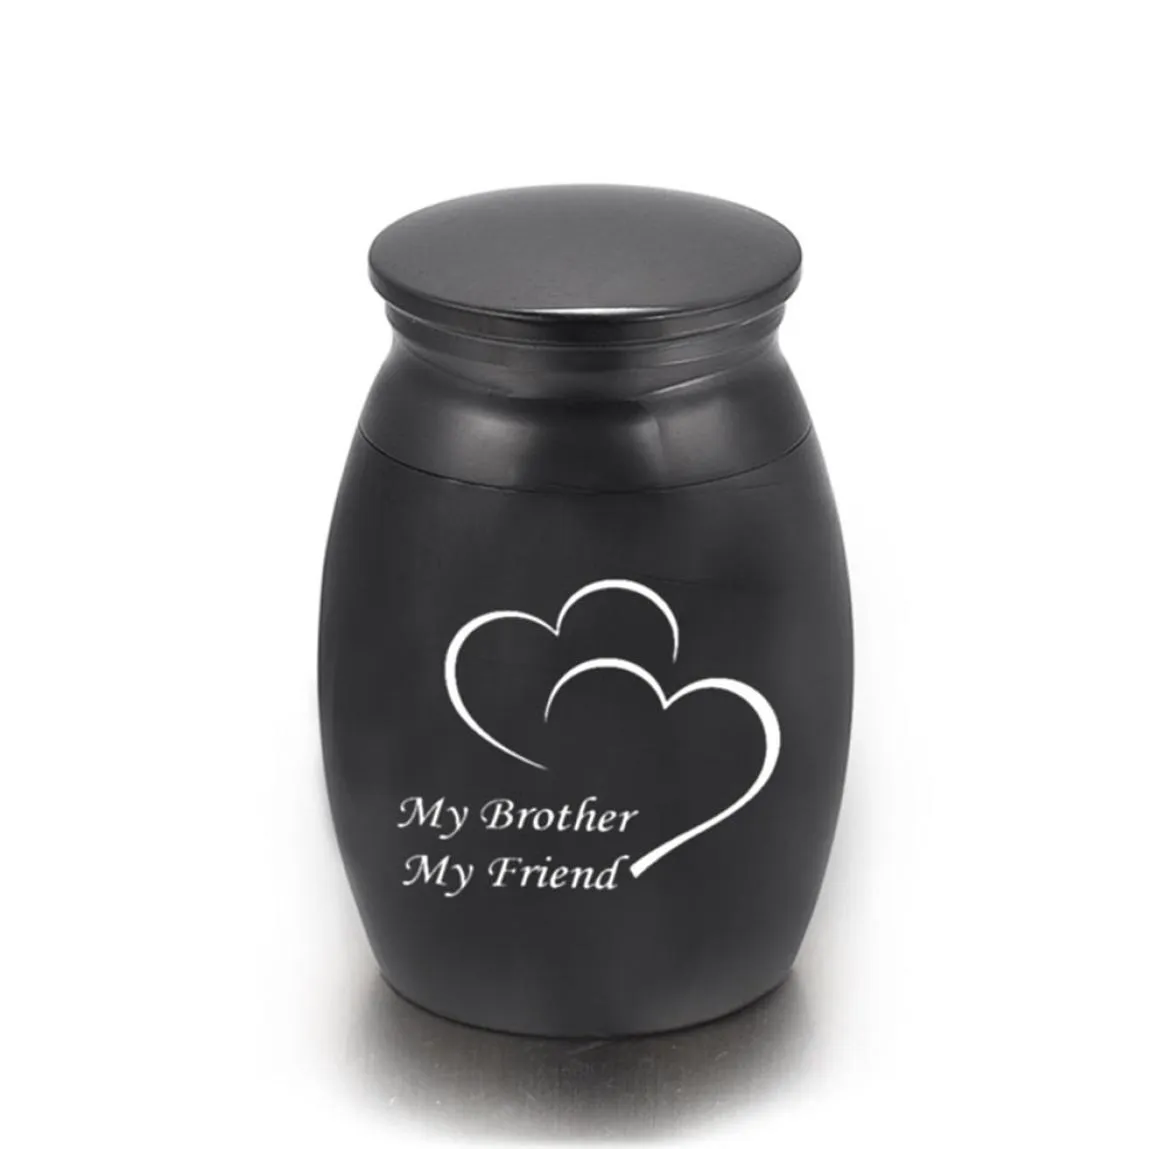 Small Cremation Keepsake Urns for Human Ashes Mini Cremation Urn Funeral Urns for Ashes Cremation Funeral UrnMy Brother My Friend6861352